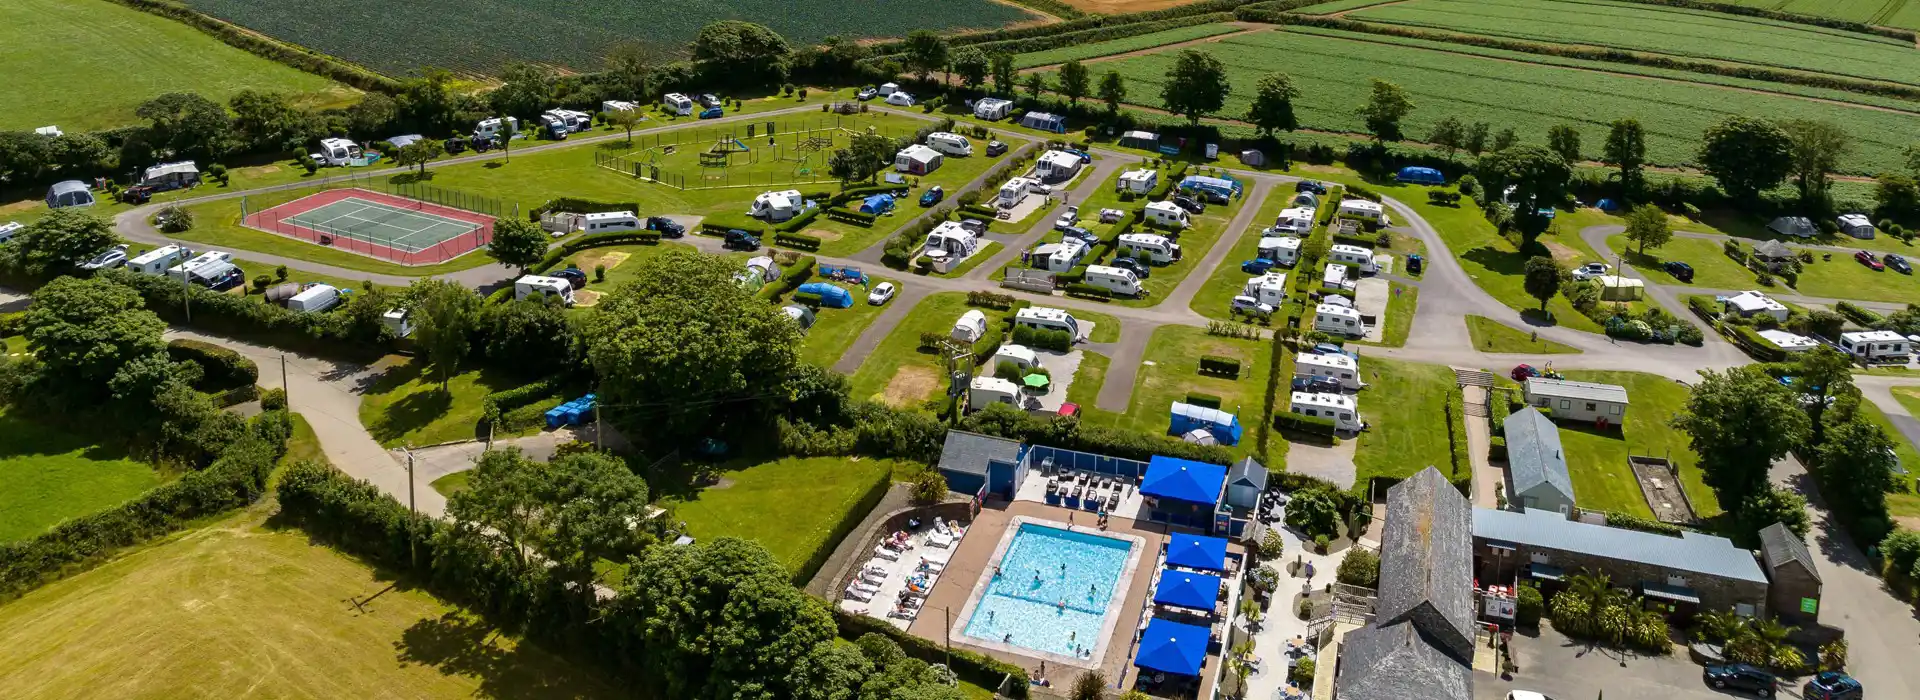 Holiday parks in England